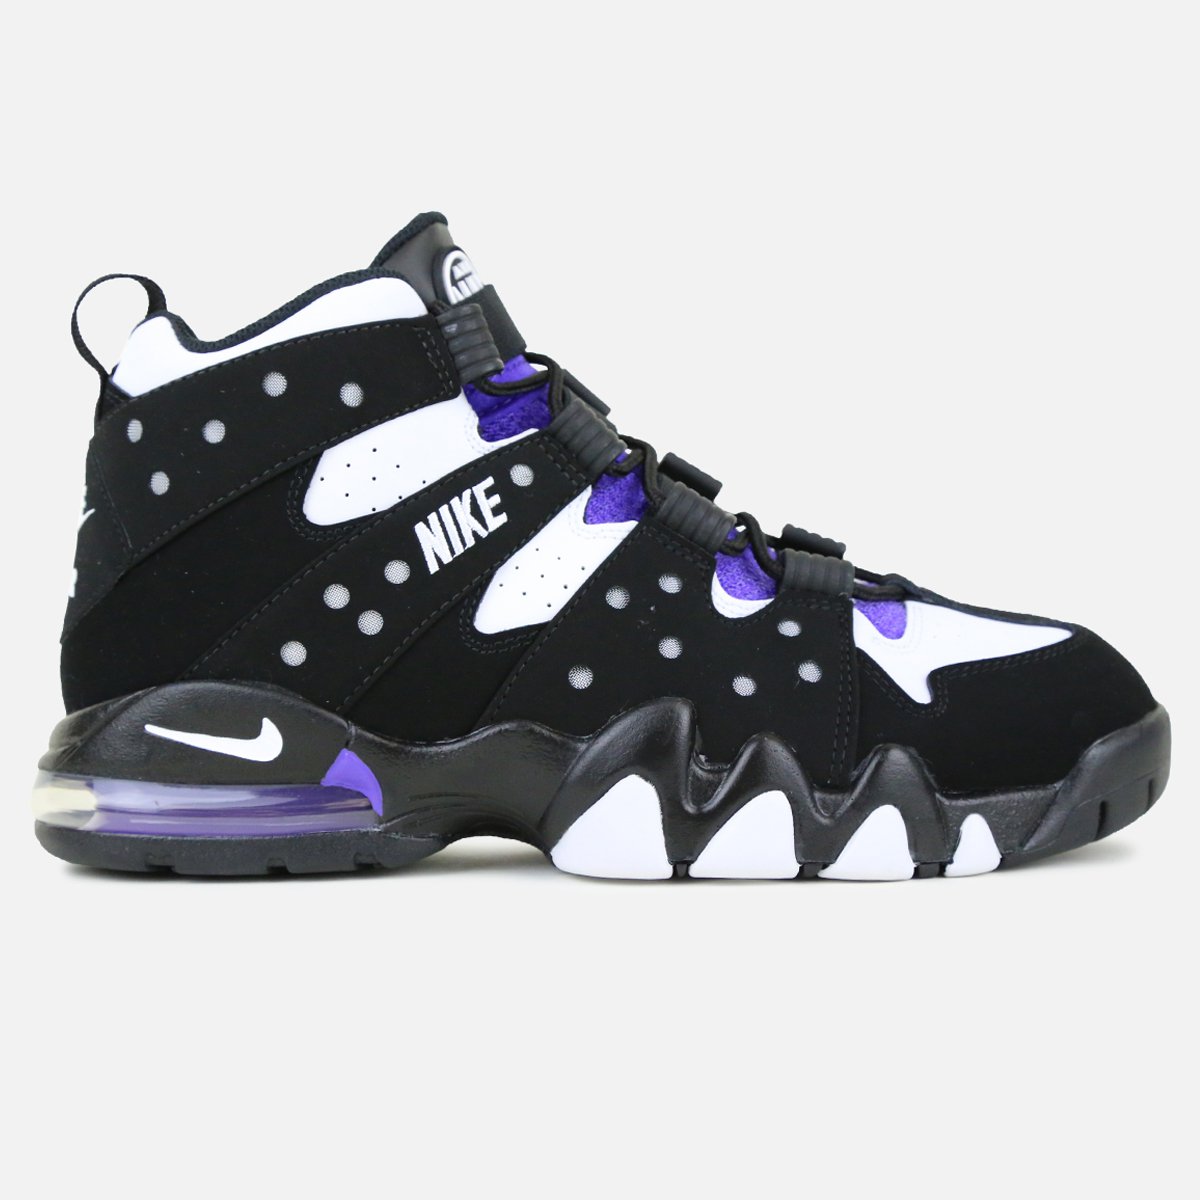 Nike Air Max 2 CB '94 - Black / Pure Purple-White - Images, Release ...